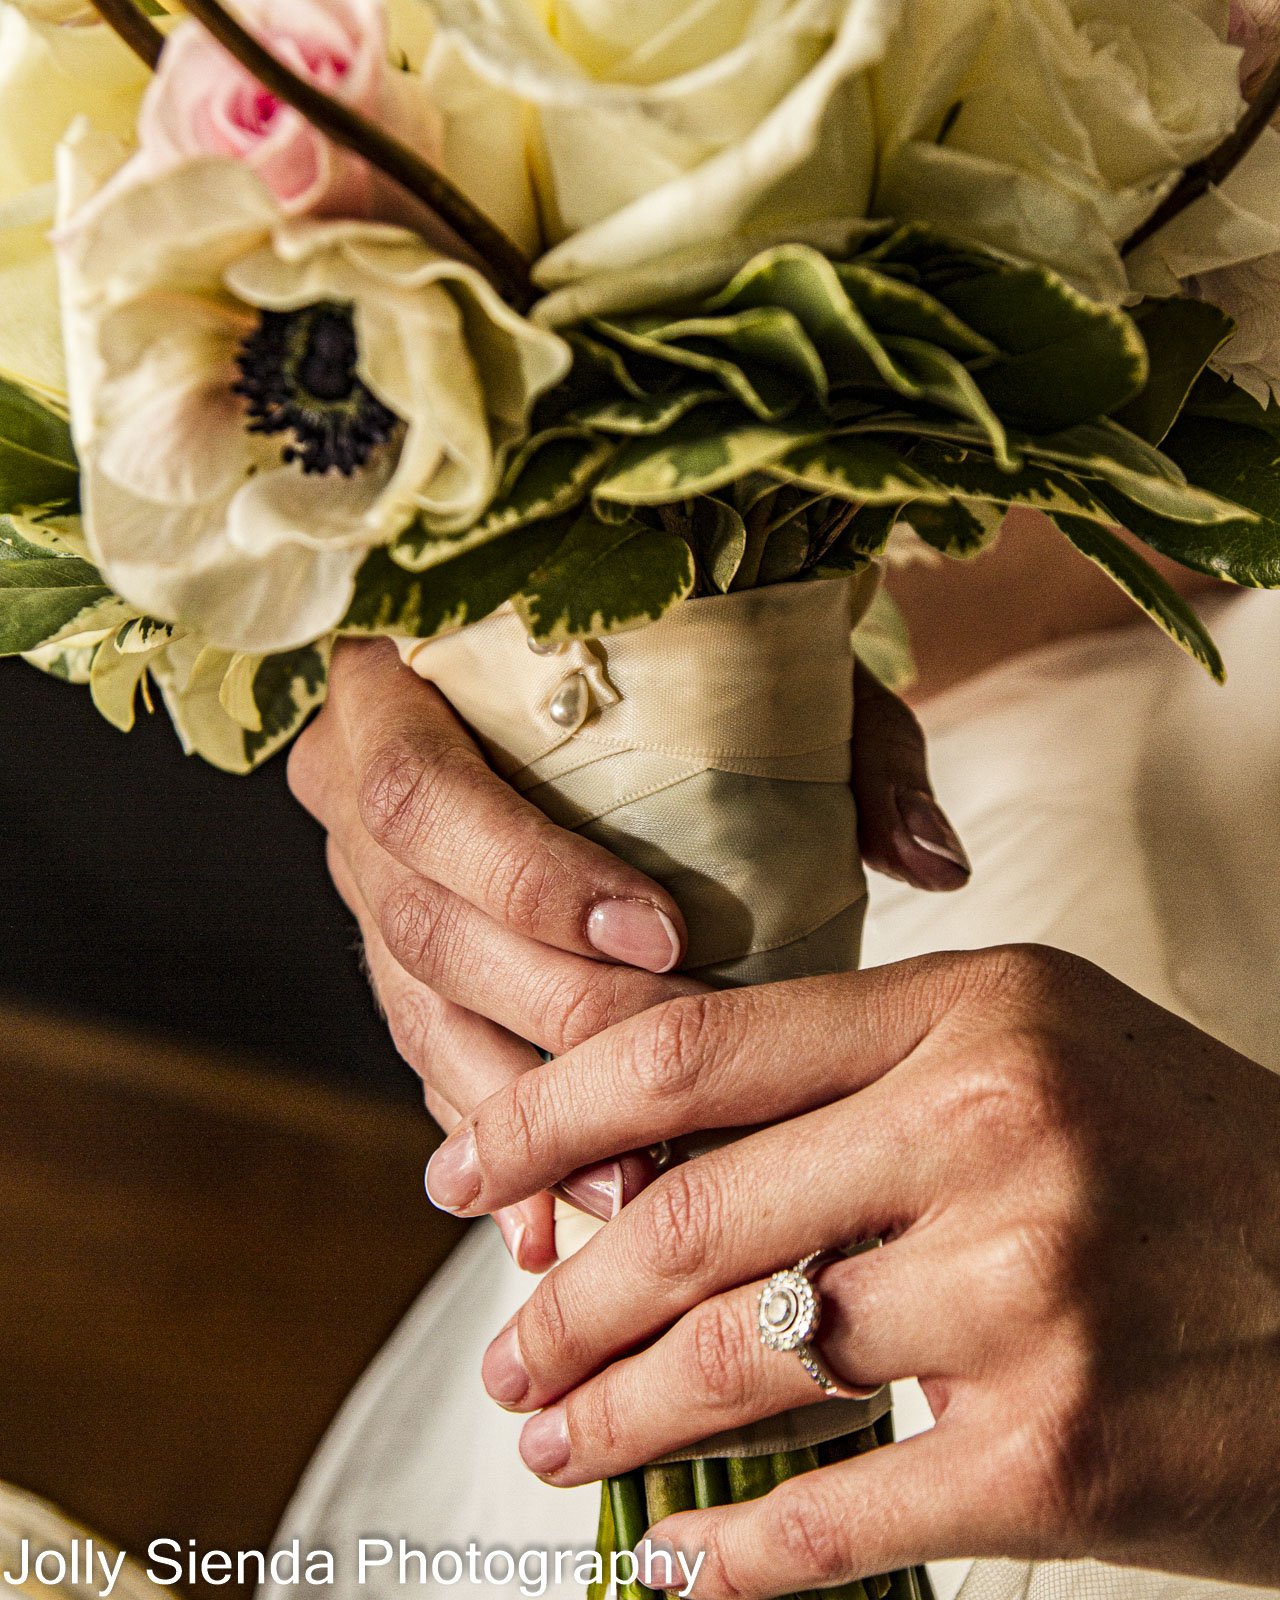 Bridal bouquet and the diamond engagement ring